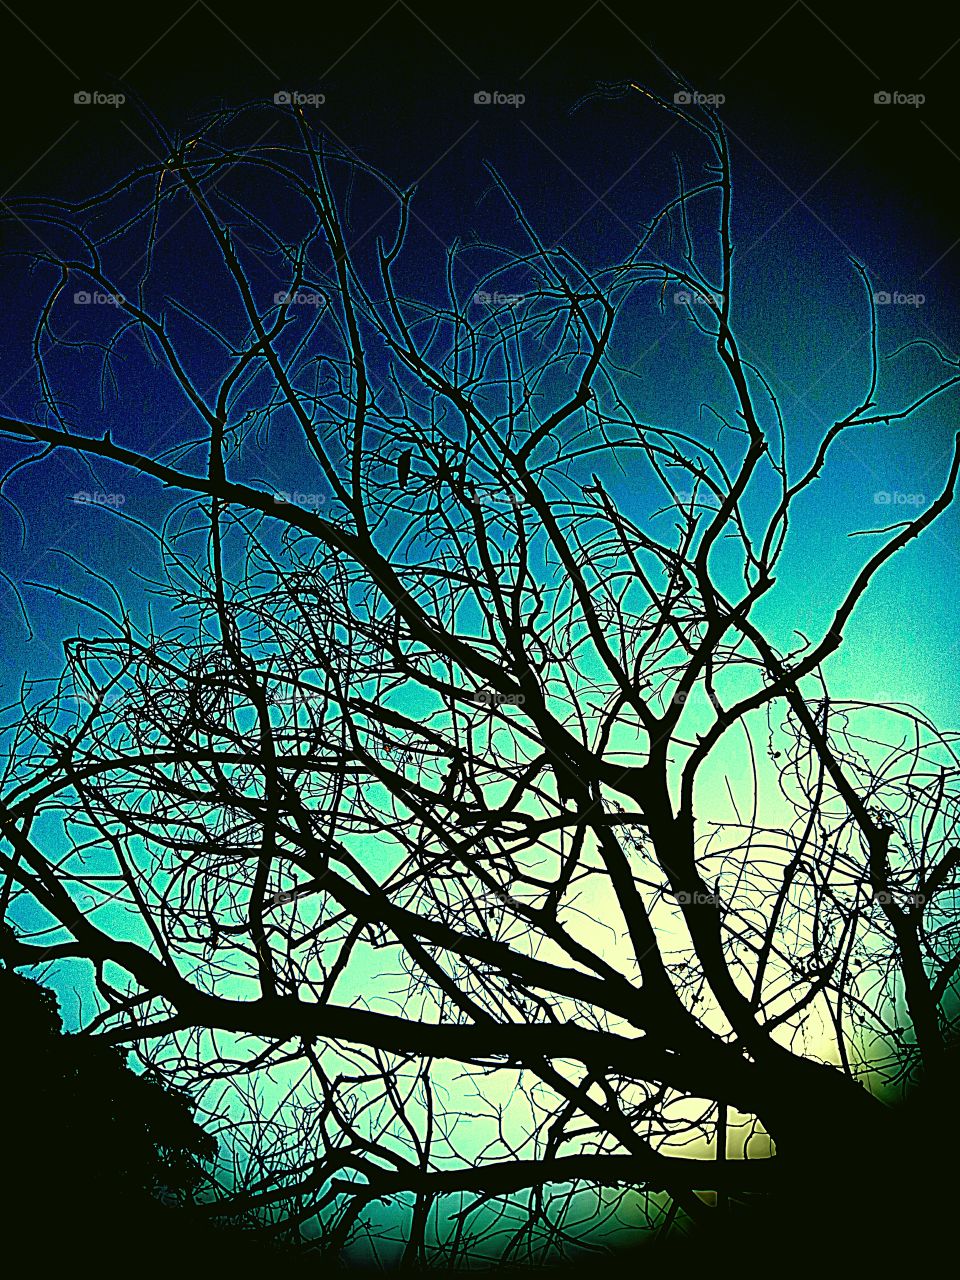 When you get your views by thinking out of the box,Then a Dark image could also be a big Breakthrough in your life..it's Just a dried wasted tree with a crow sitting on a small branch ...when i shuttered it..it's nothing for my eyes..but when I make my views shifted towards the other side,am glad that I got t good than I expected.